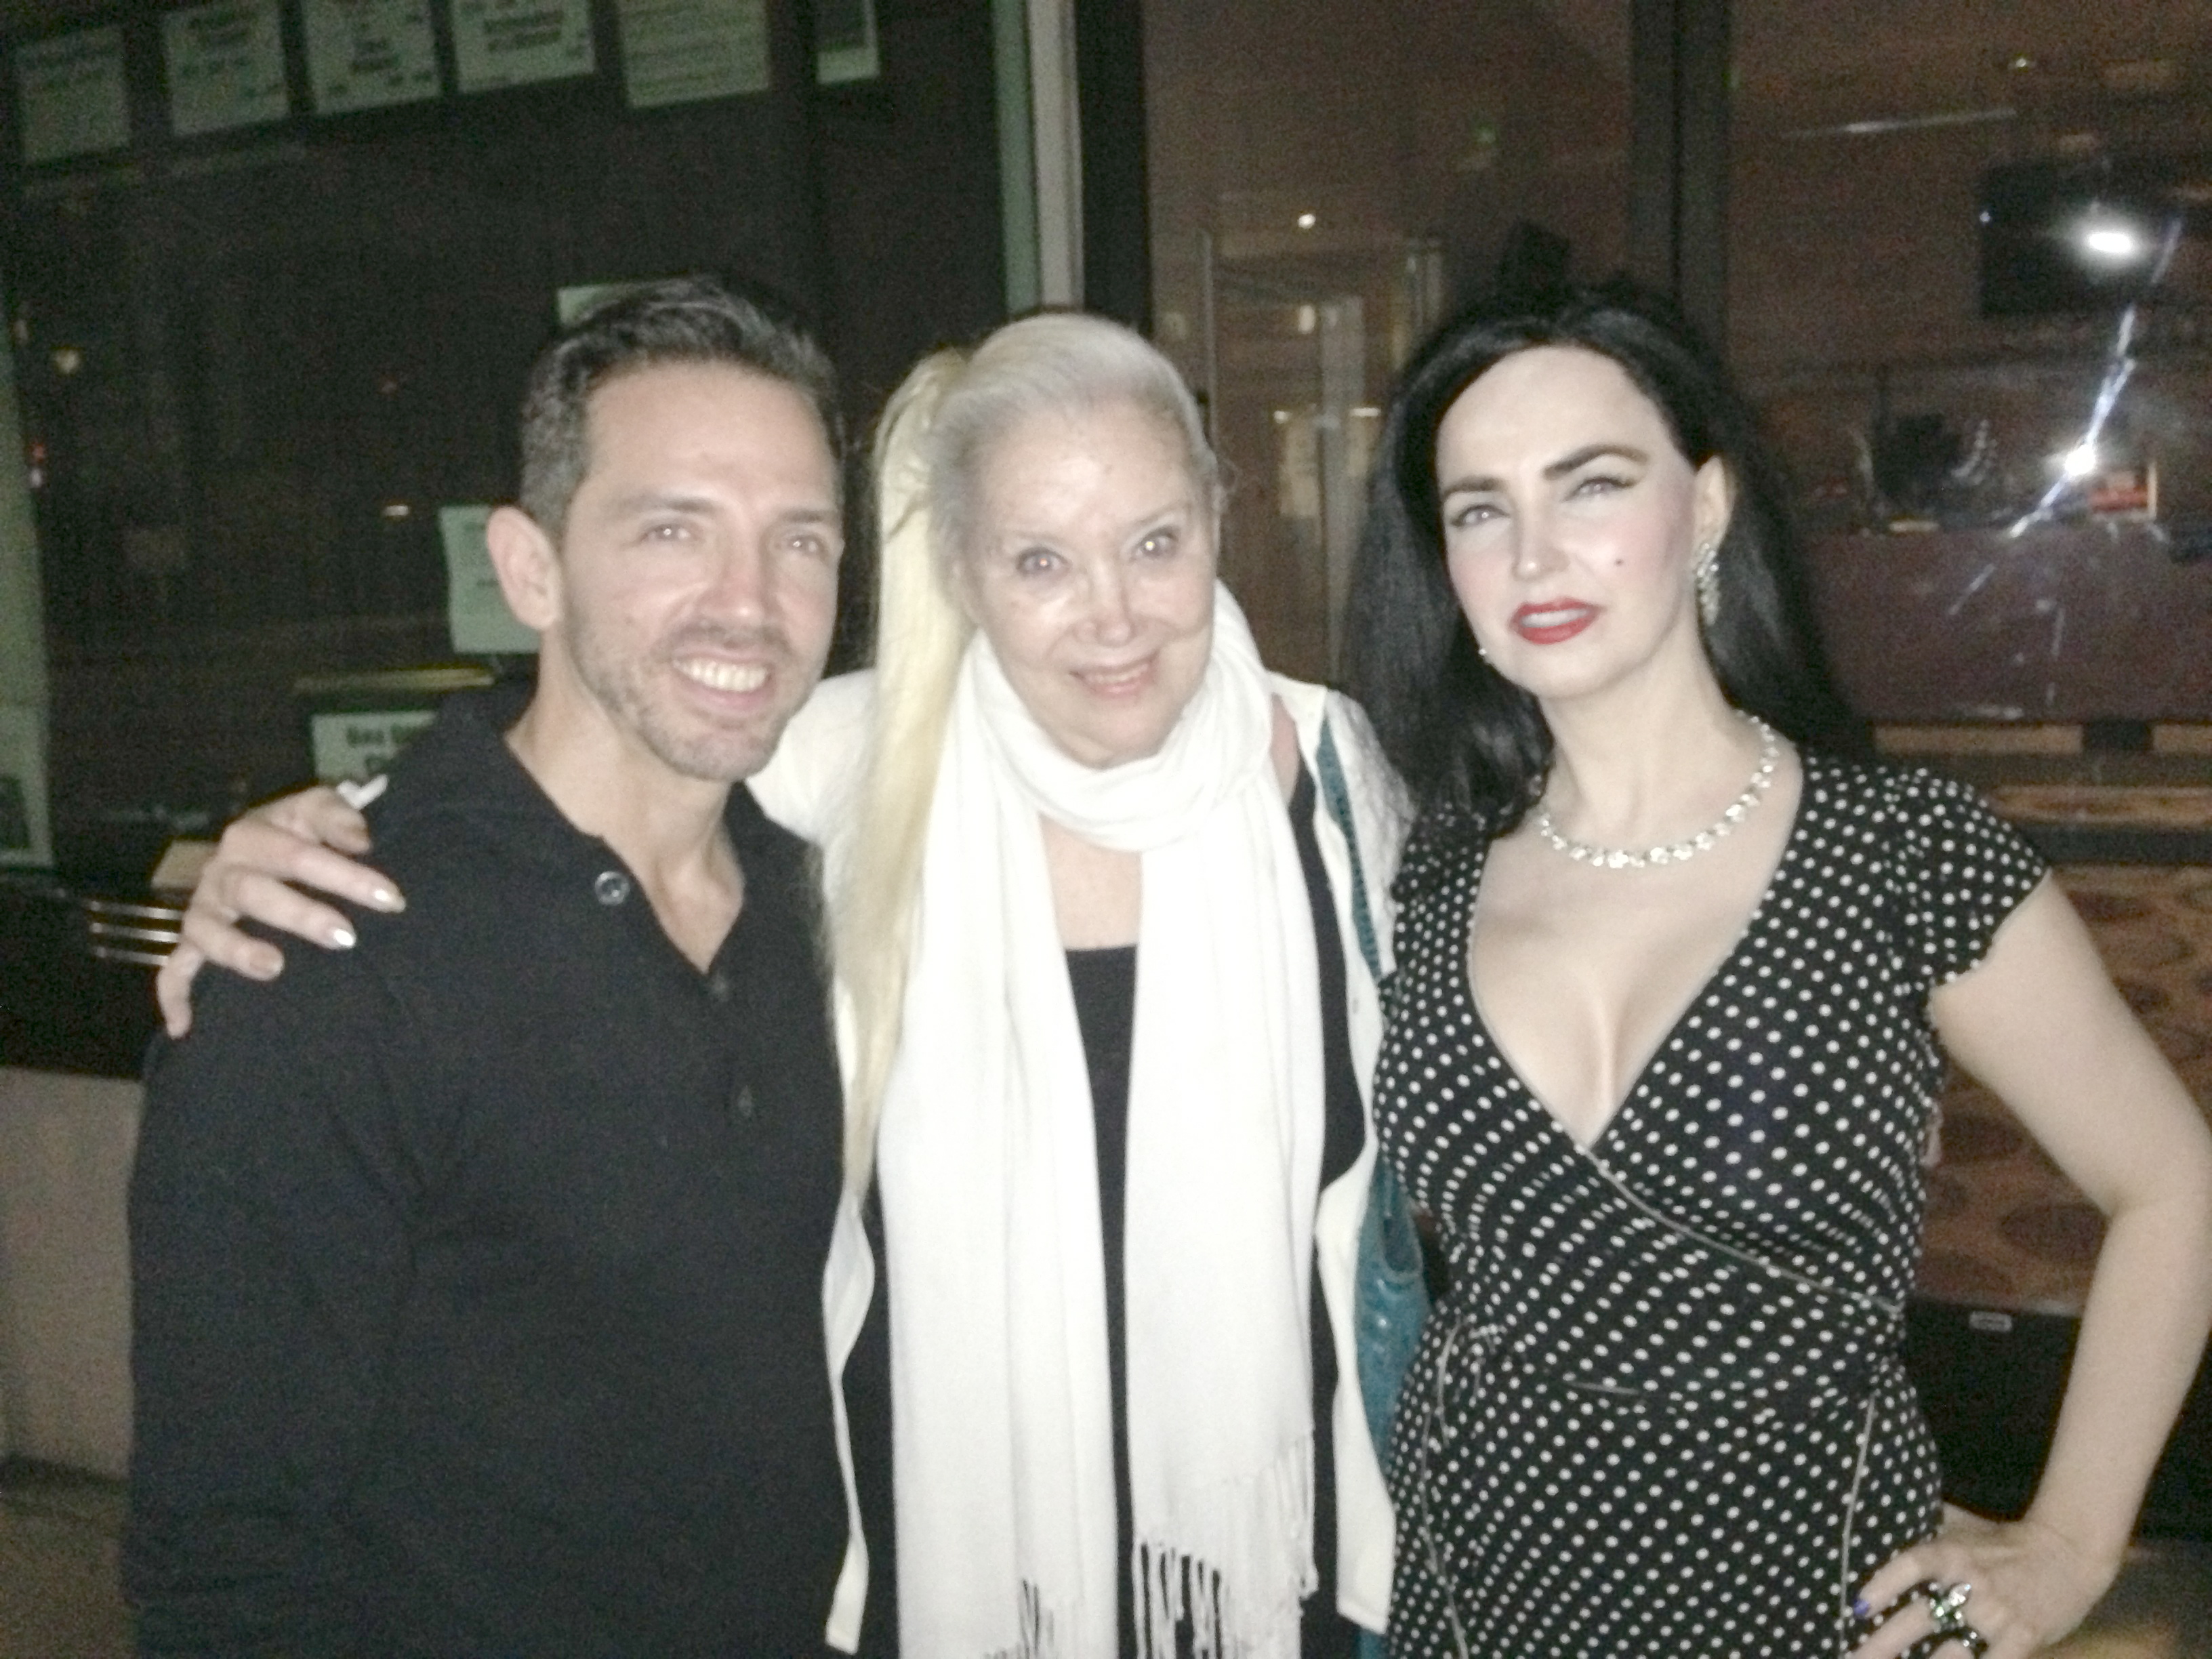 Actress Alexis Kiley with actress Sally Kirkland and actor Mel England at the premiere screening of Archeology of a Woman. Laemmle Music Hall, Beverly Hills, California